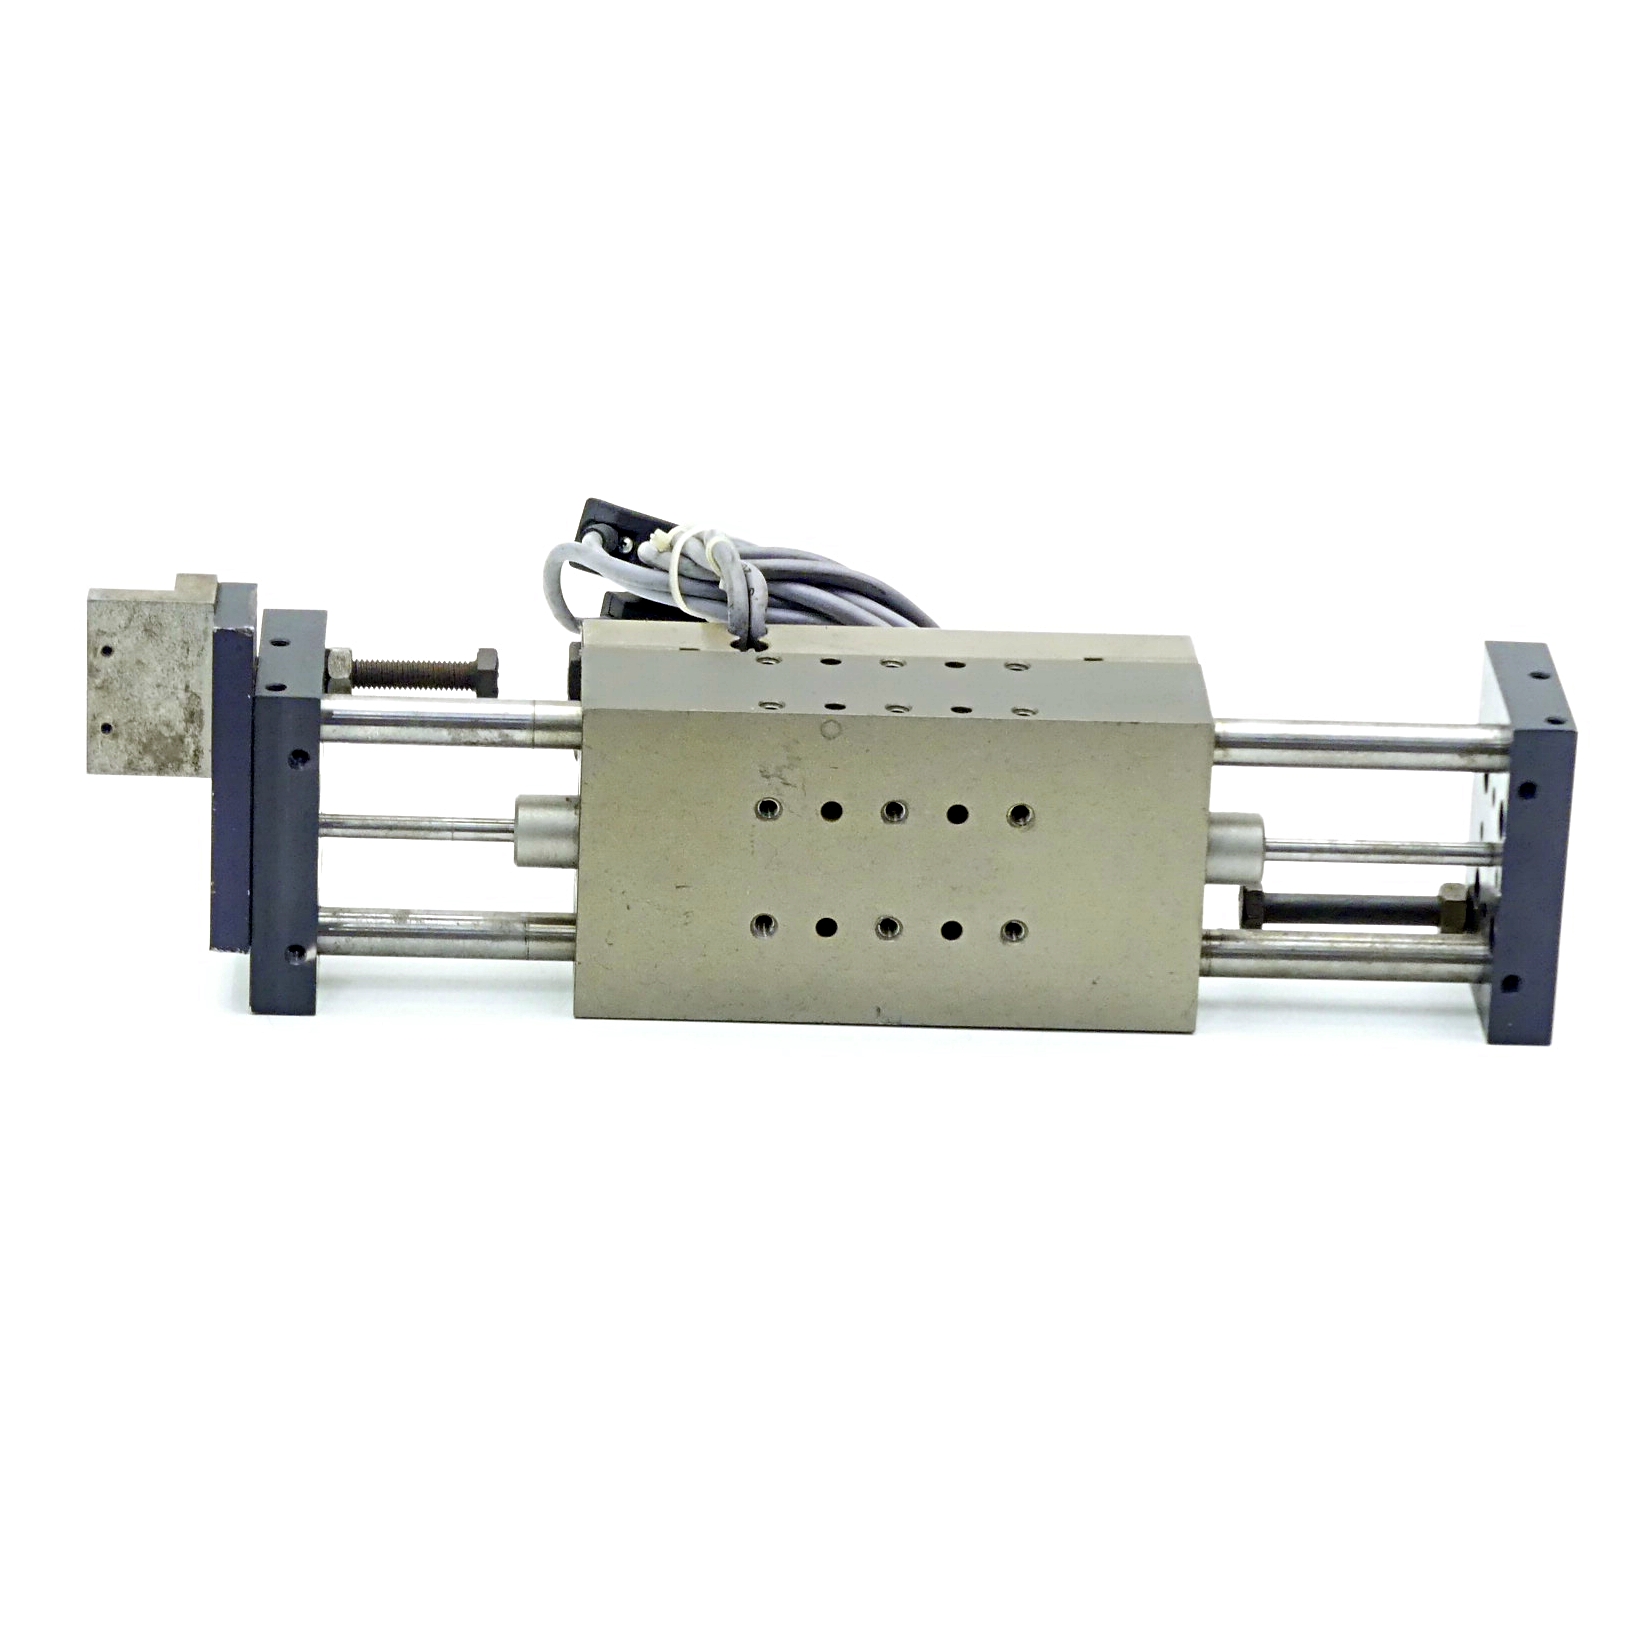 Linear unit MSL 2-90 with plug 